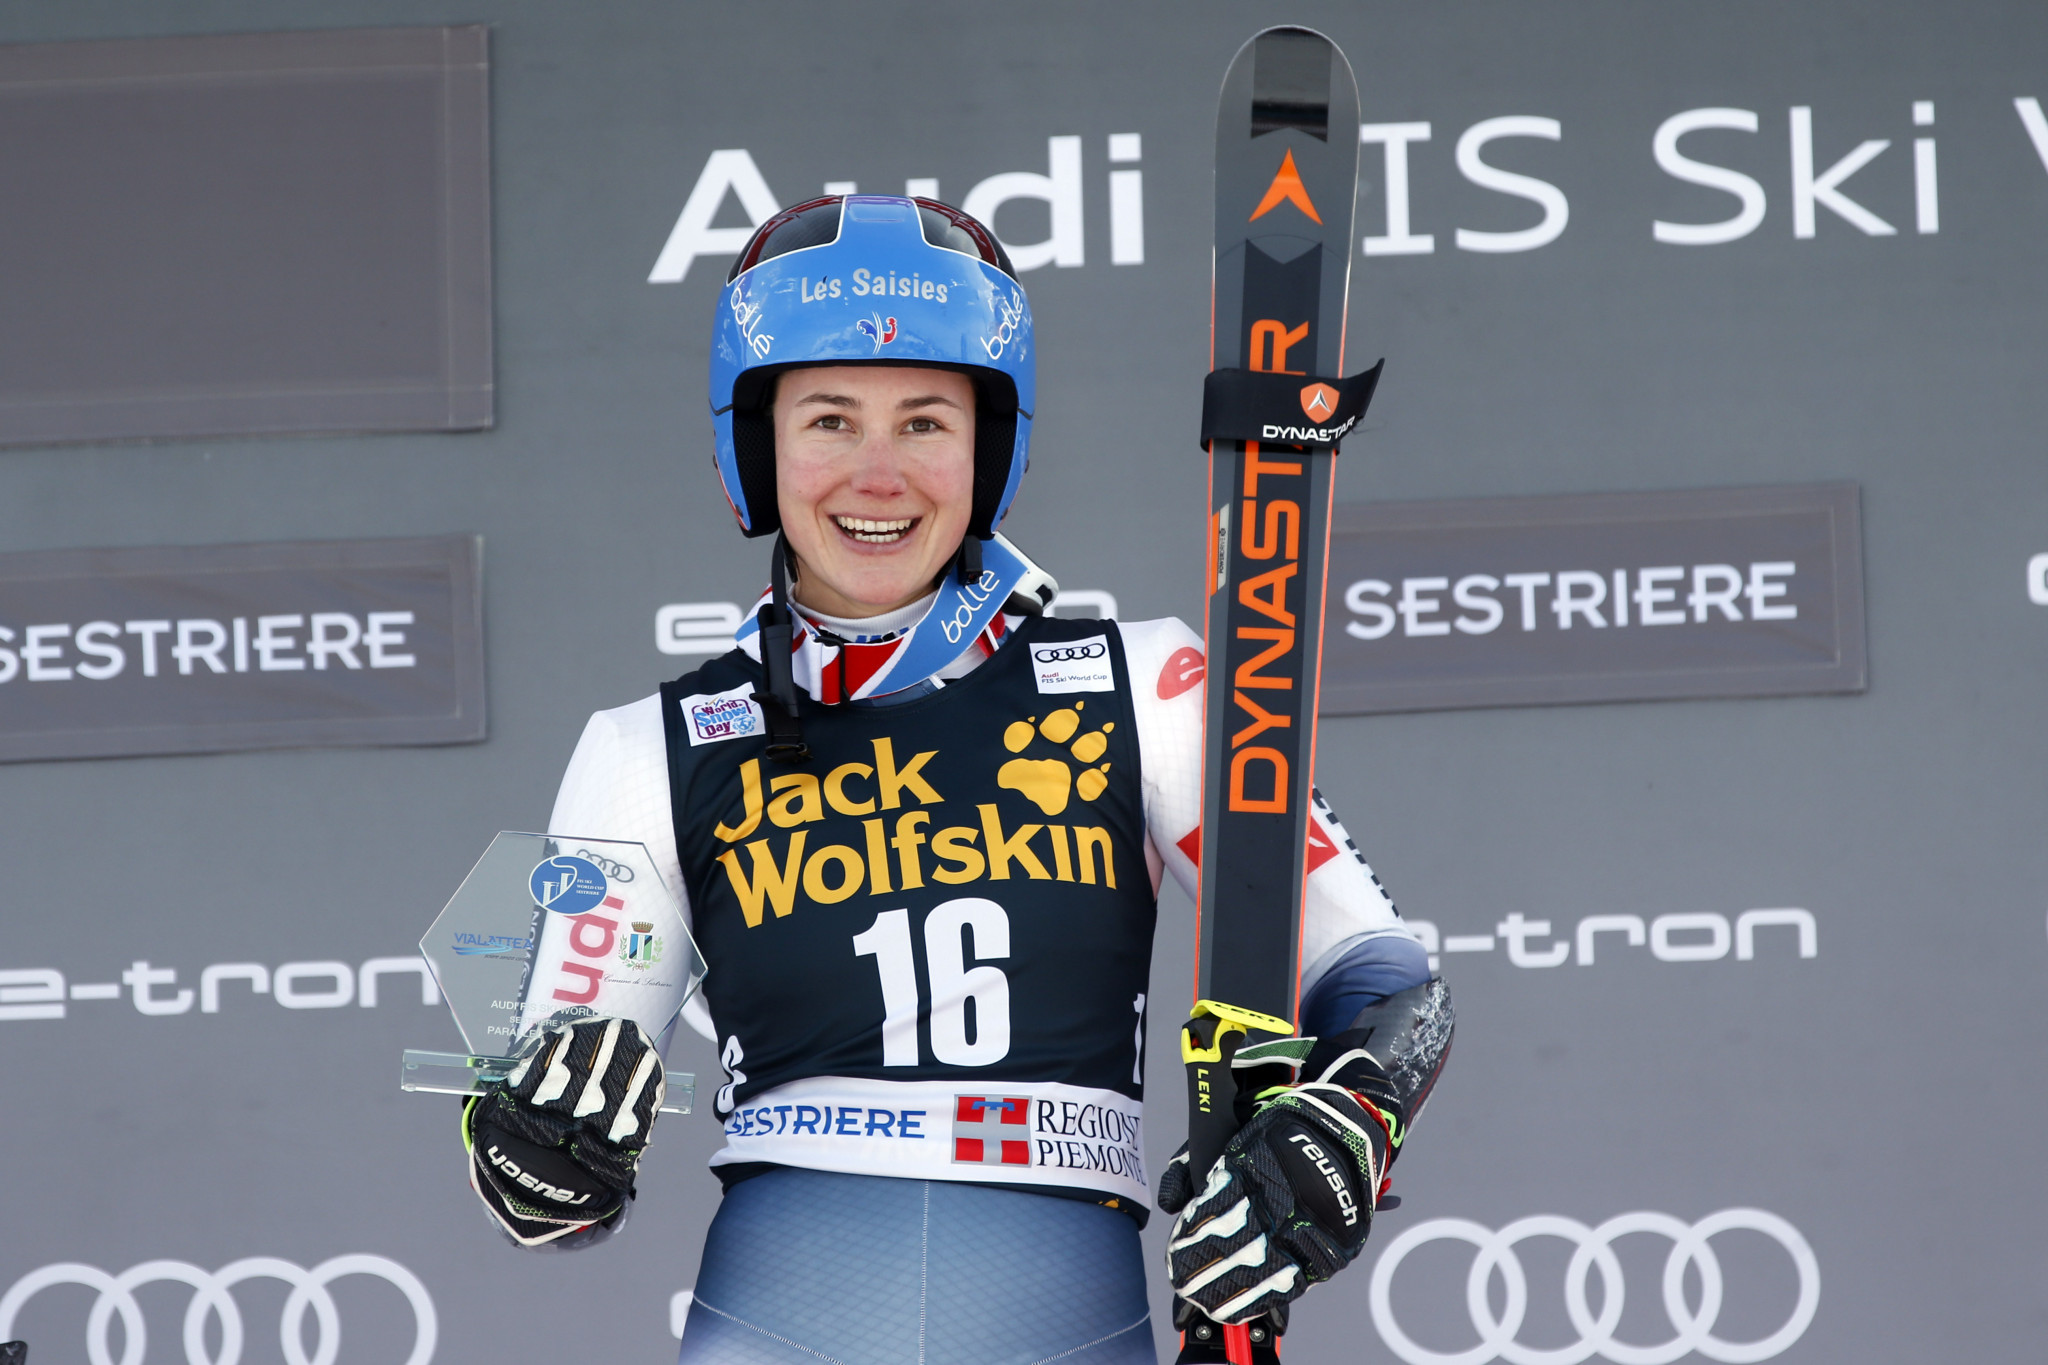 Direz wins controversial parallel giant slalom at FIS Alpine Ski World Cup